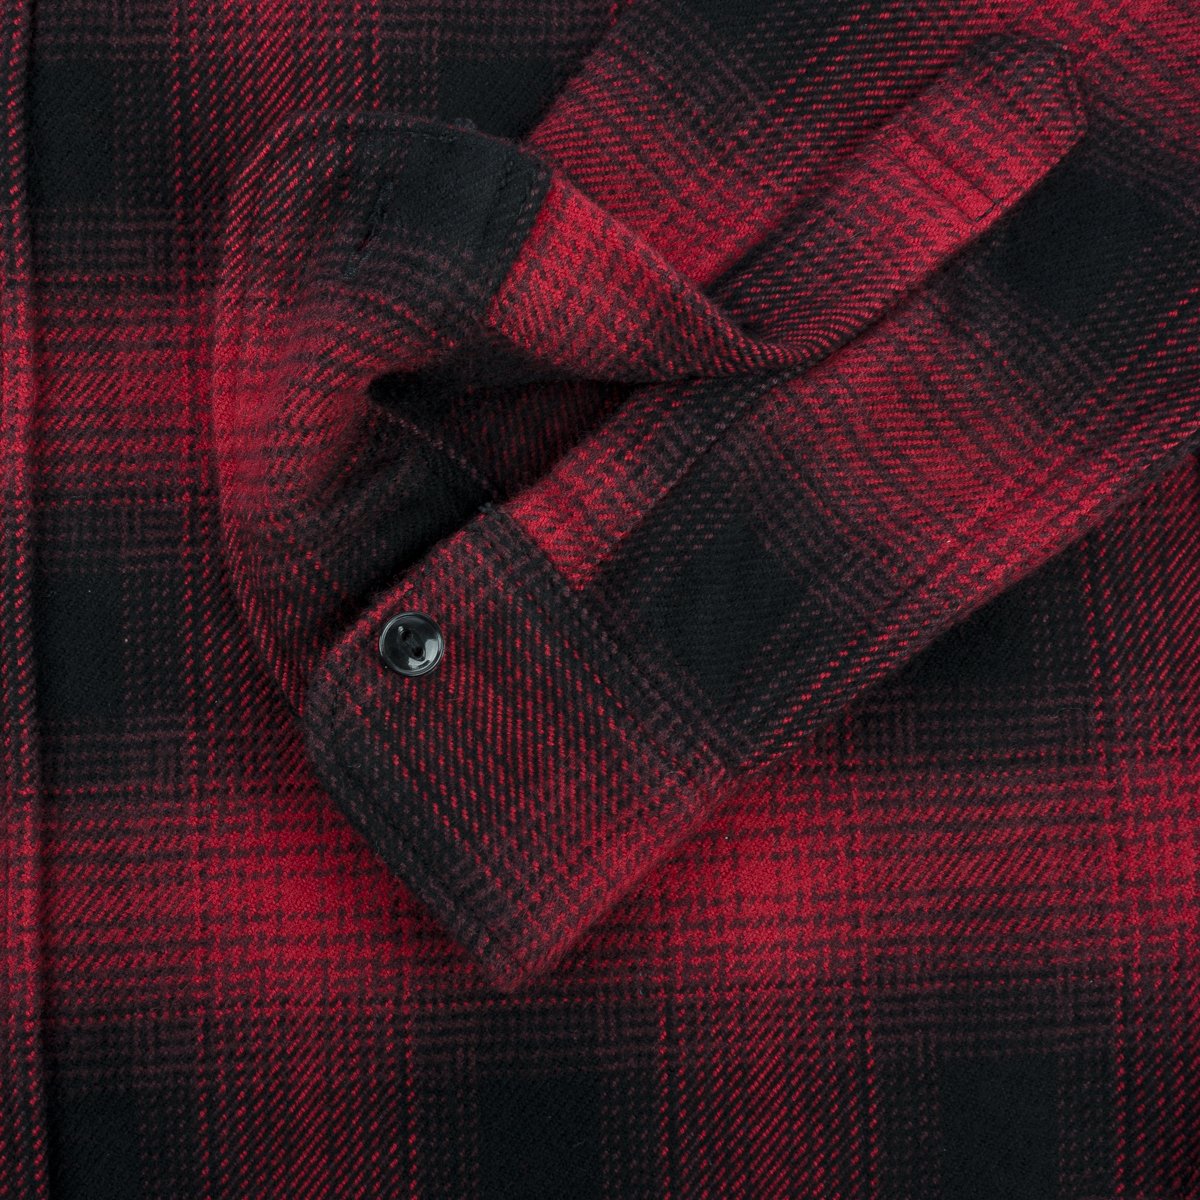 IHSH-265-RED Ultra Heavy Flannel Ombré Check Work Shirt Red/Black